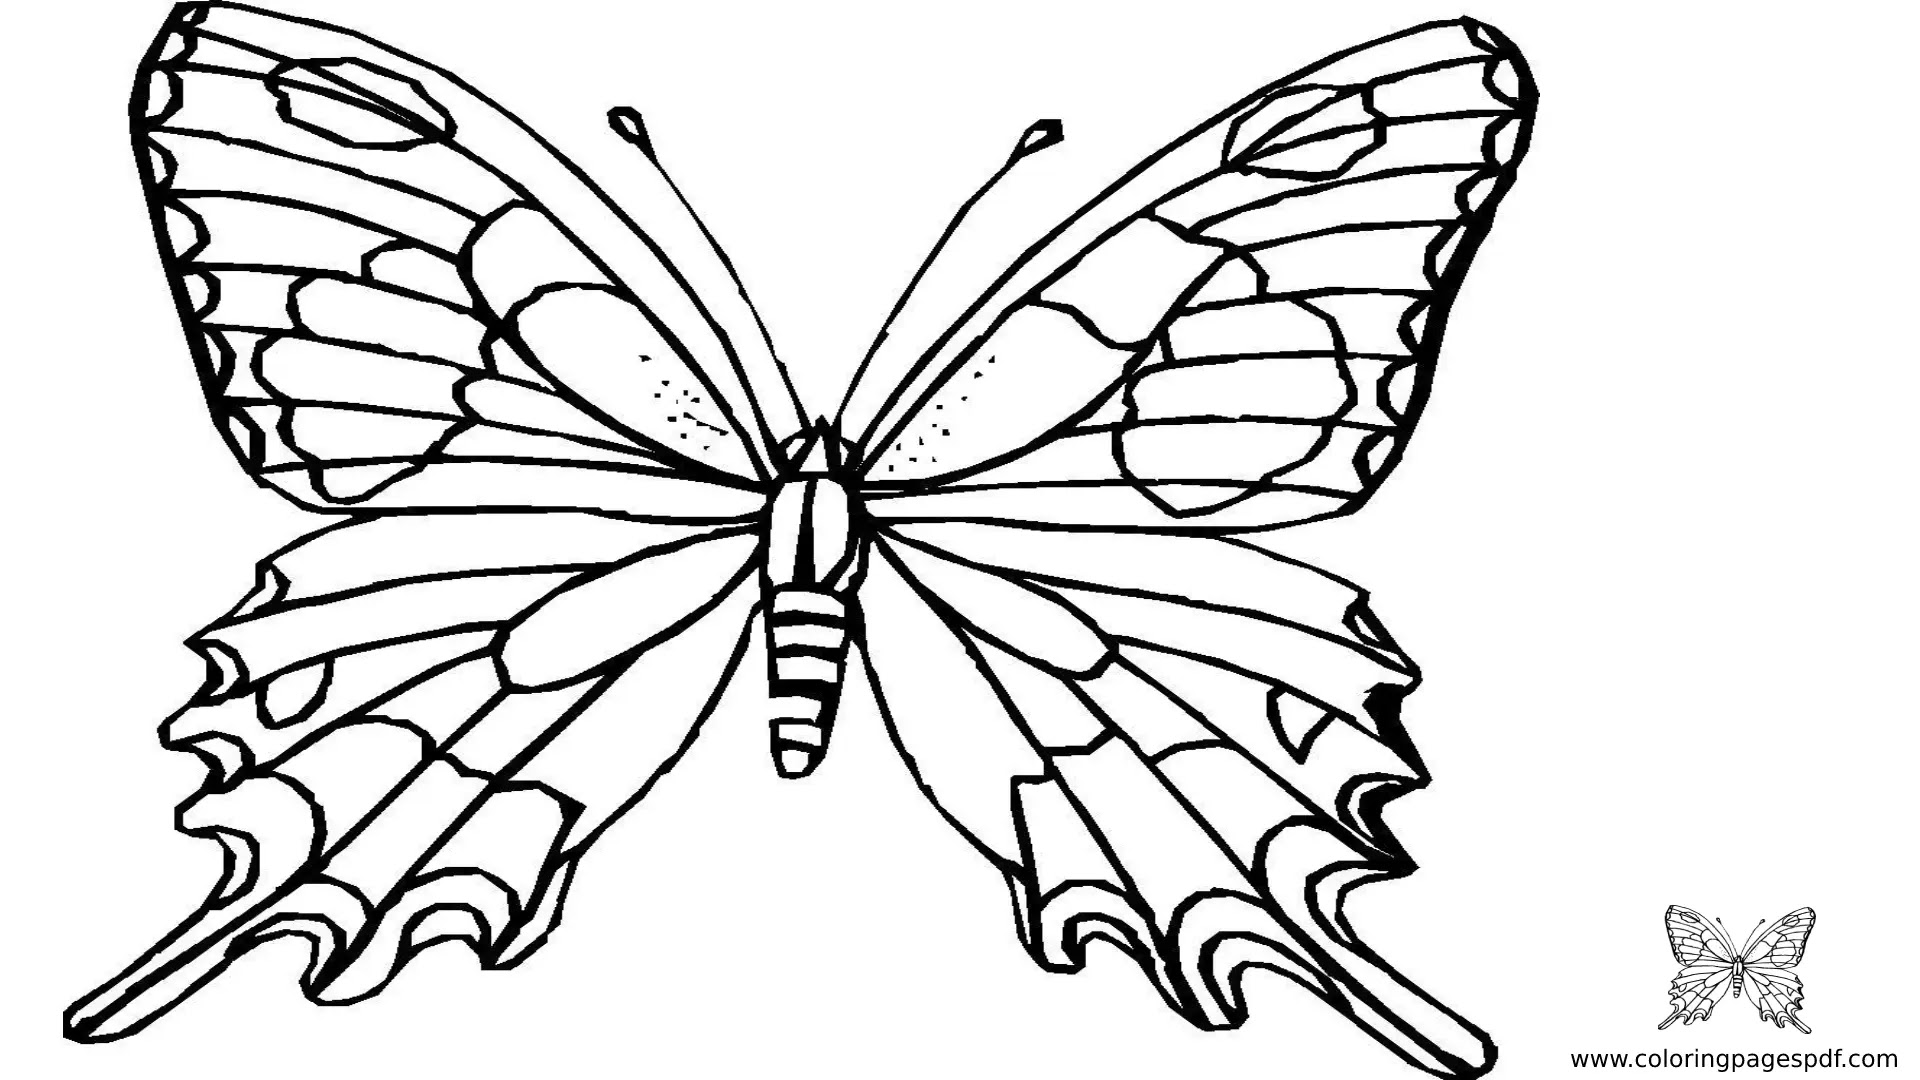 Coloring Pages Of A Spelndid Butterfly